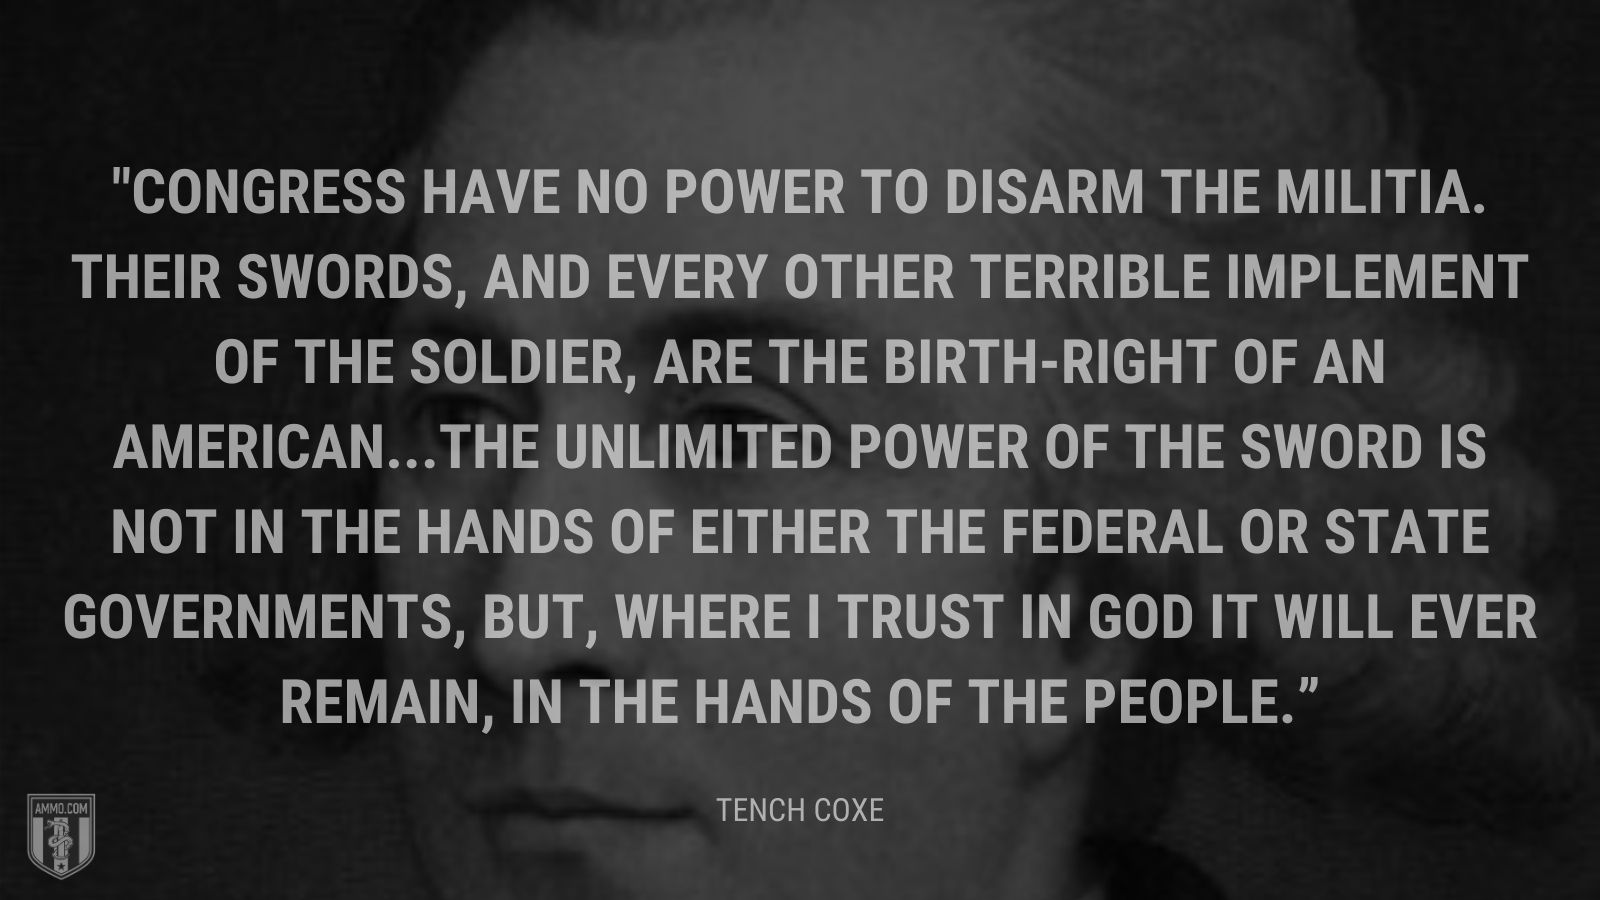 “Congress have no power to disarm the militia. Their swords, and every other terrible implement of the soldier, are the birth-right of an American...The unlimited power of the sword is not in the hands of either the federal or state governments, but, where I trust in God it will ever remain, in the hands of the people.” - Tench Coxe